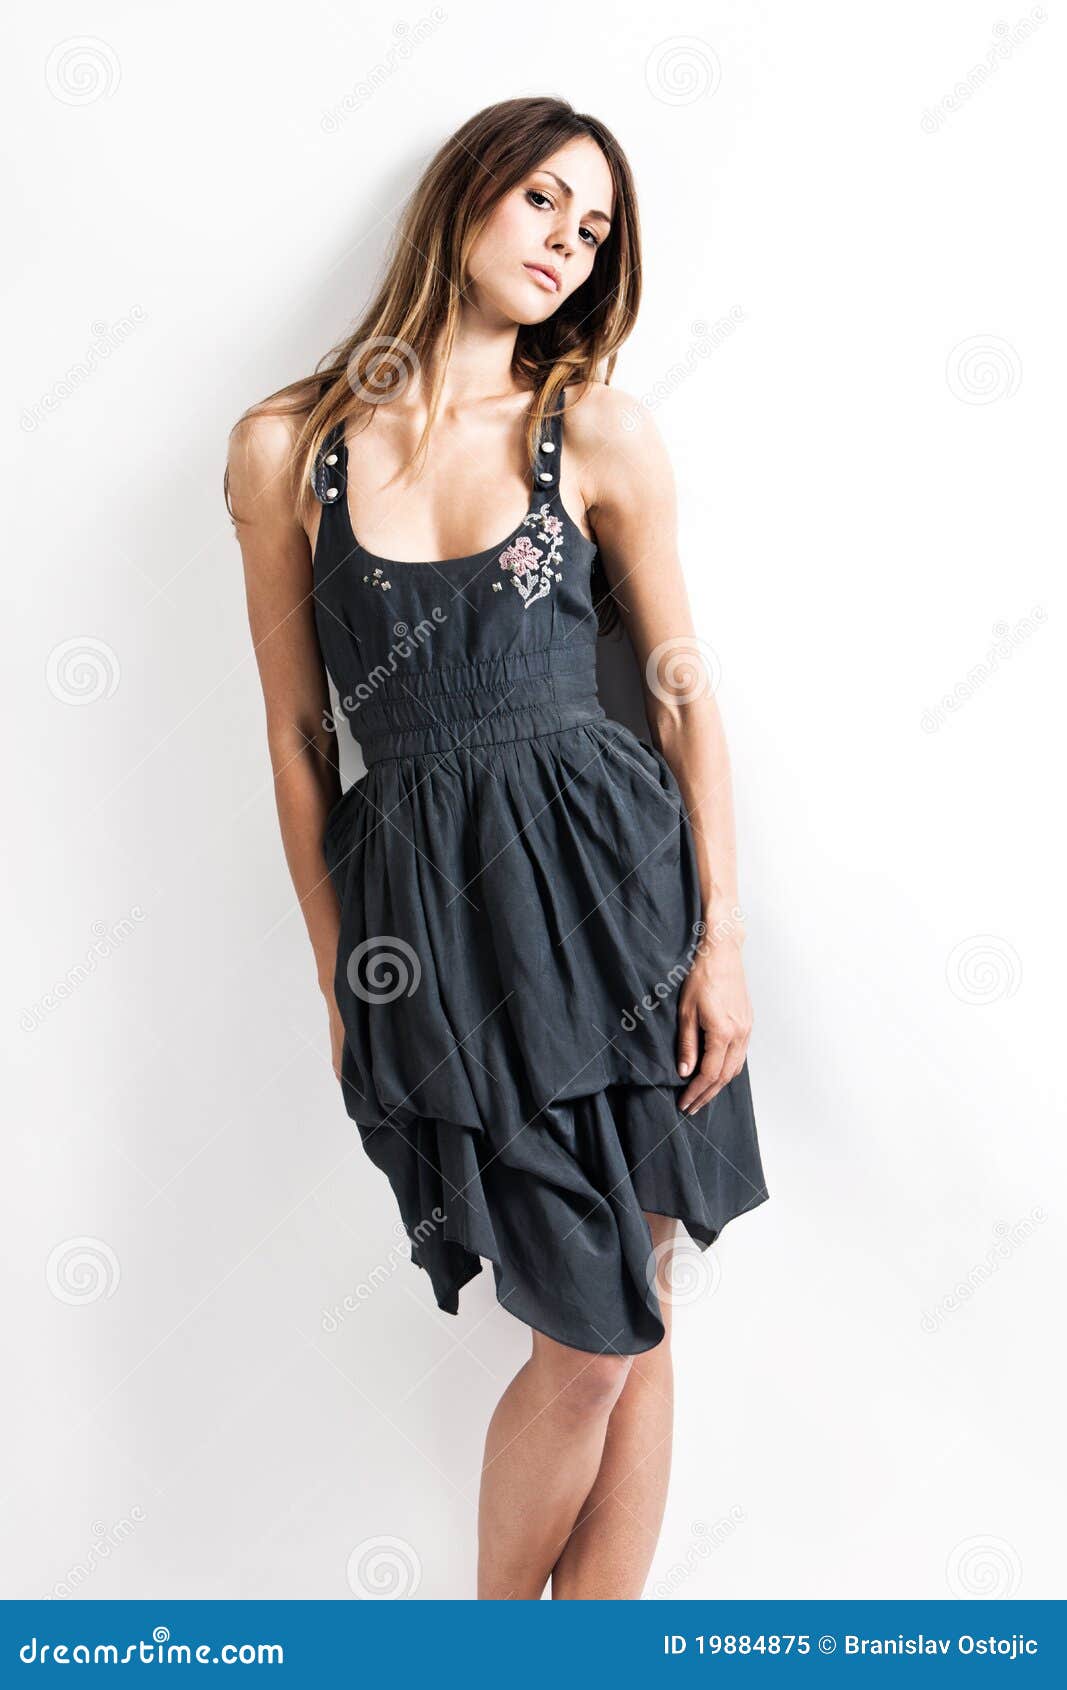 Woman Portrait in Summer Dress Stock Image - Image of pensive ...